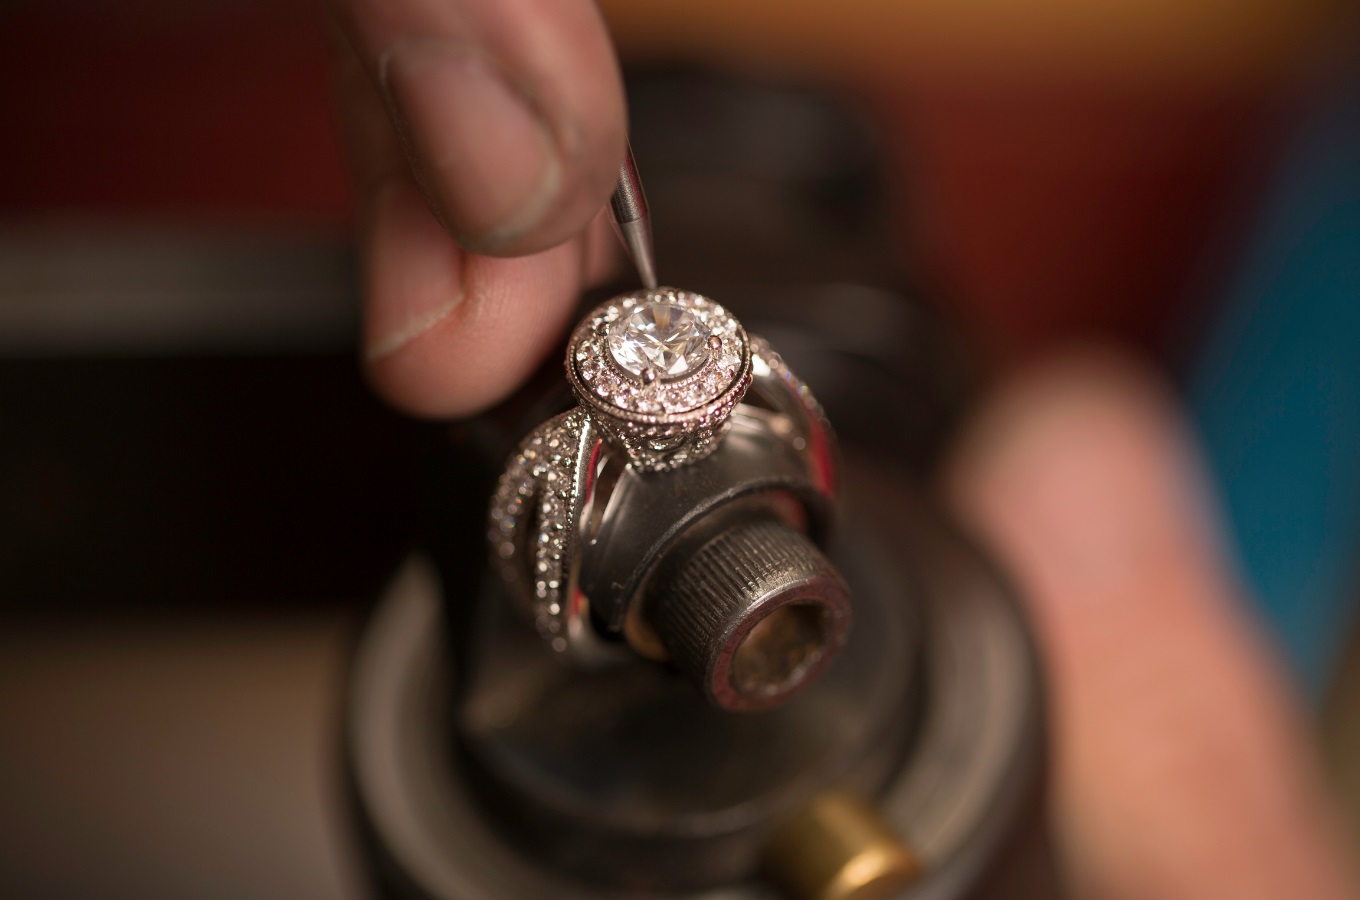 Design Your Own Engagement Ring